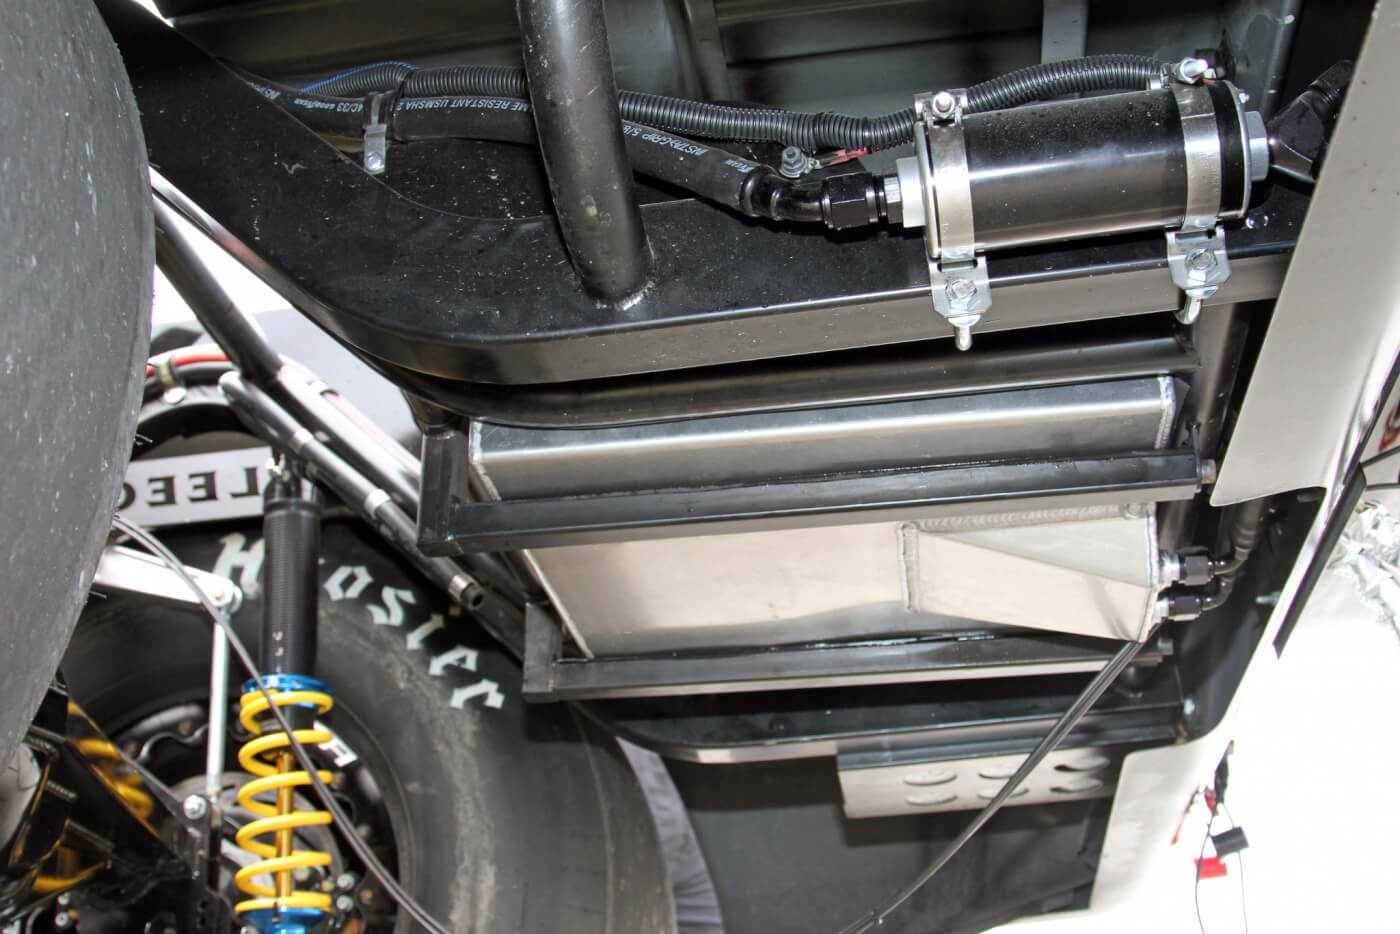 Crawling under the rear of the truck, you’ll see the aluminum fuel cell securely mounted between the new frame rails. You can also see the Fuelab electric pump on the outside of the driver side rail and the battery mount on the outside of the passenger side rail.